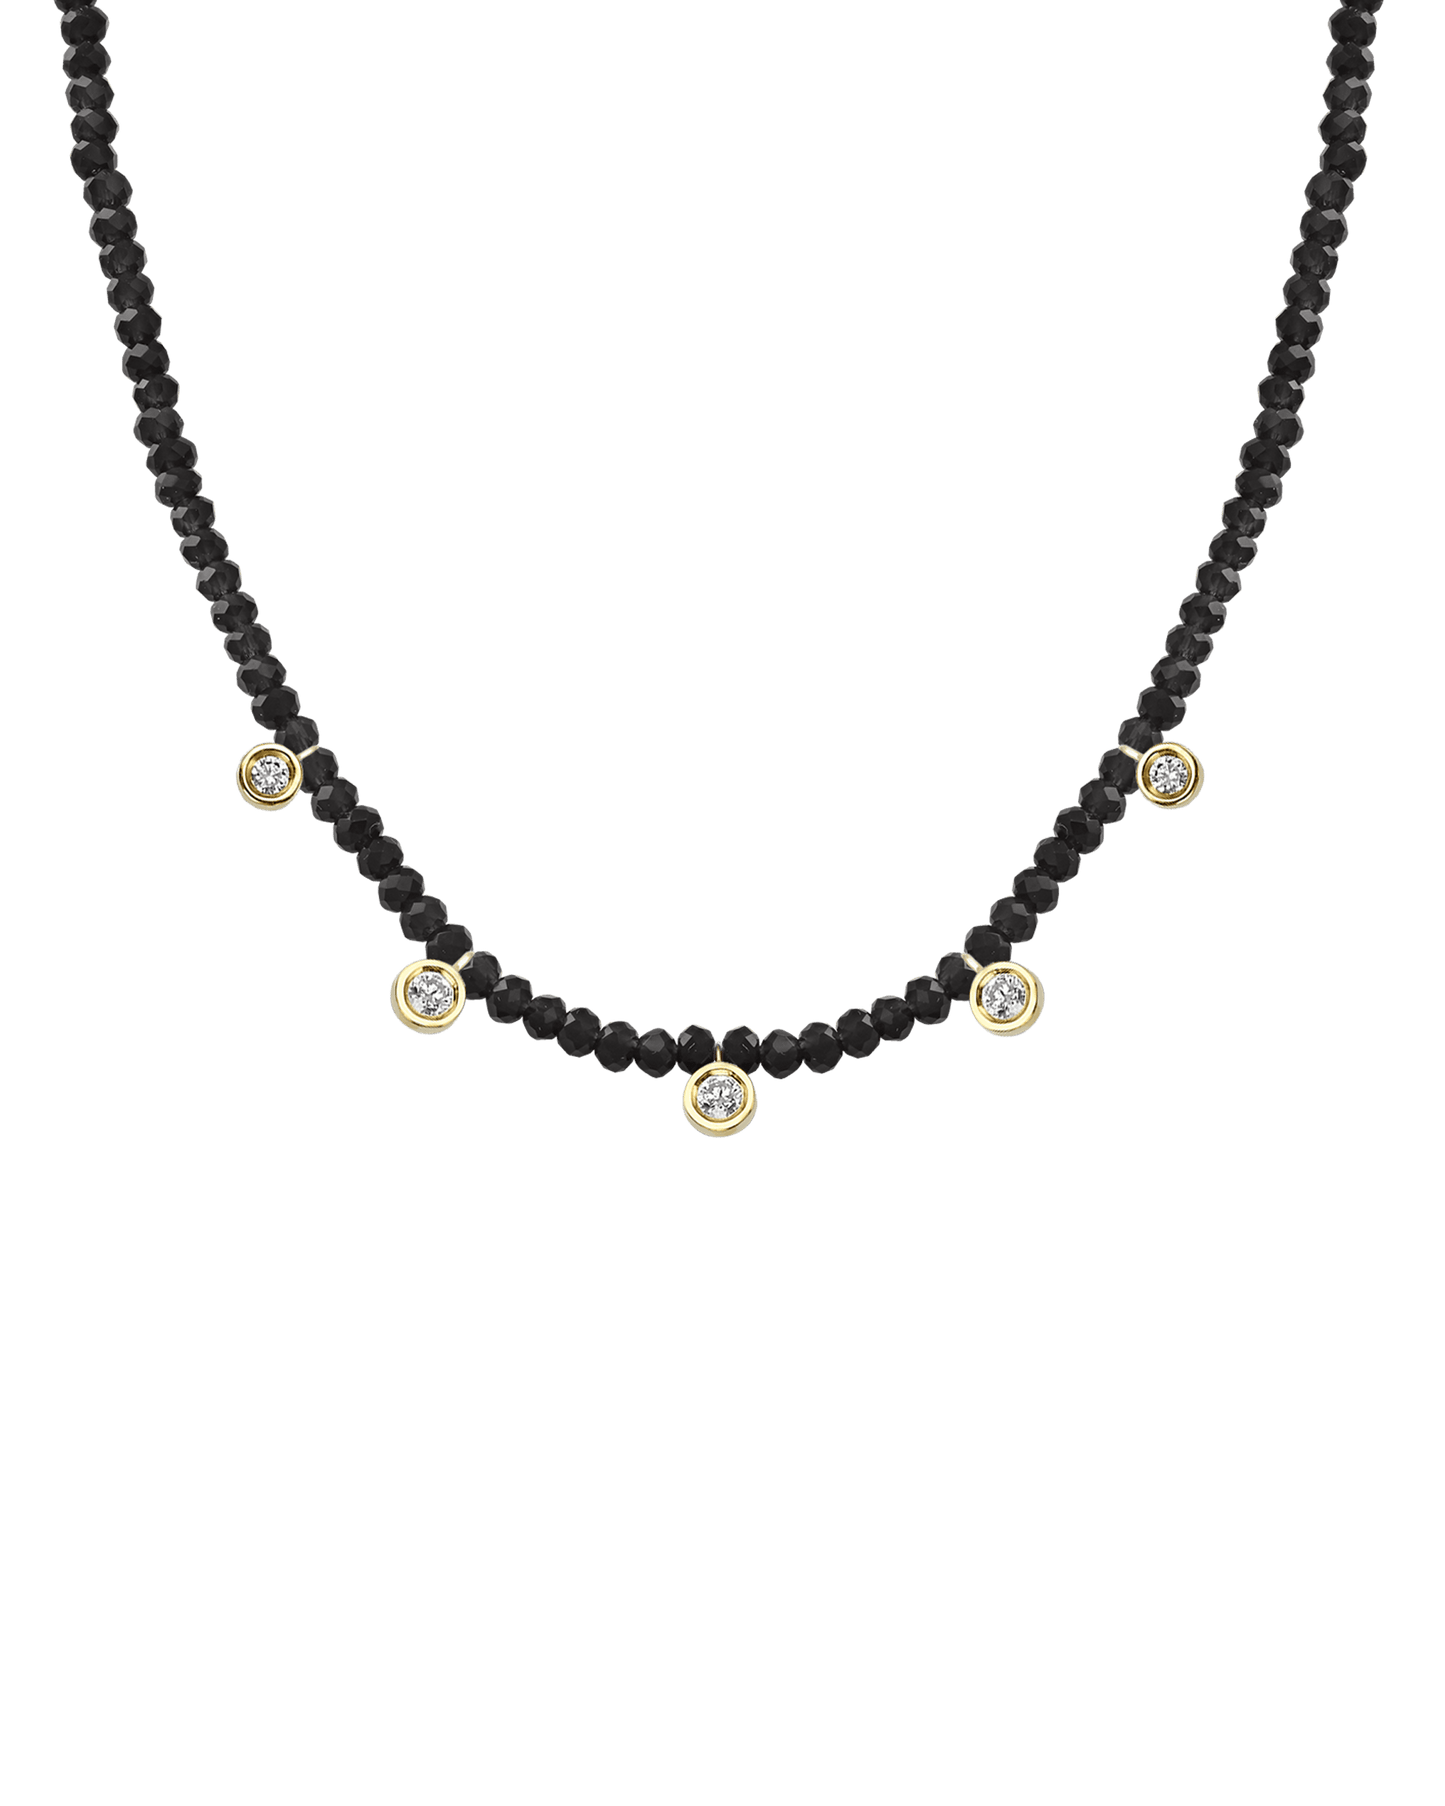 Apatite Gemstone & Five diamonds Necklace - 14K Rose Gold Necklaces magal-dev Glass Beads Black Spinnel 14" - Collar 